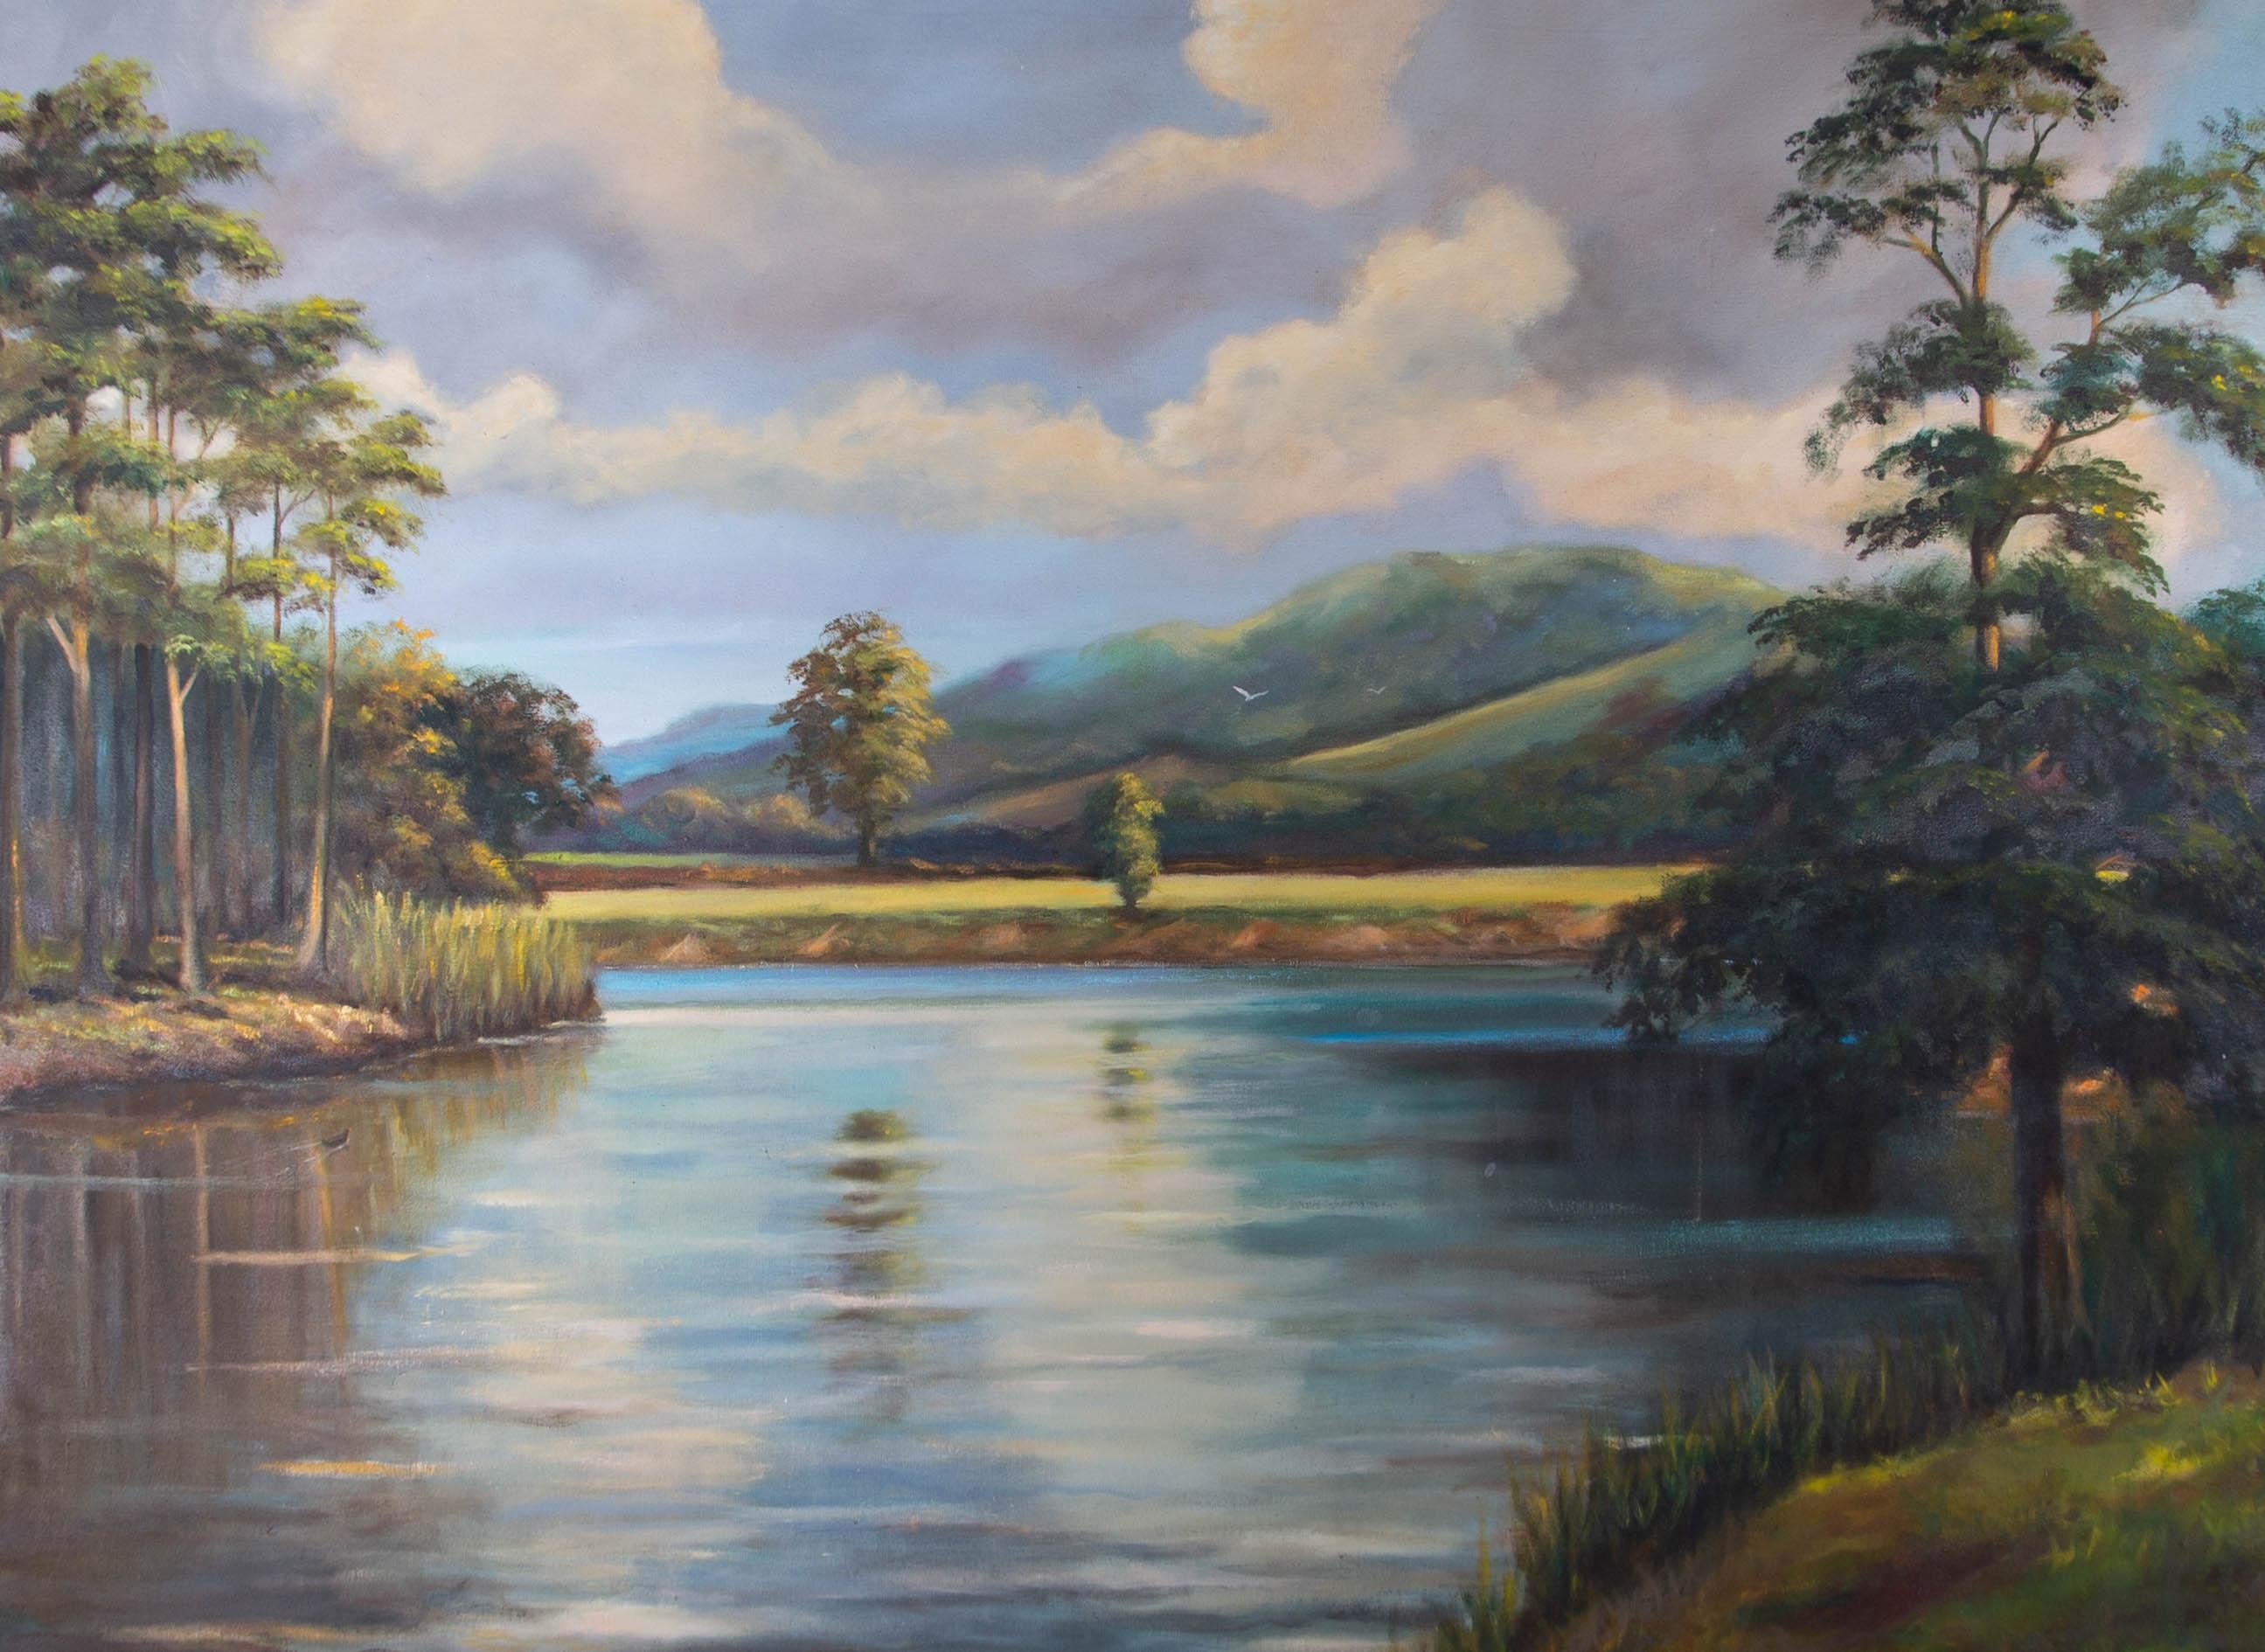 Contemporary Oil - Summer On The River - Gray Landscape Painting by Unknown